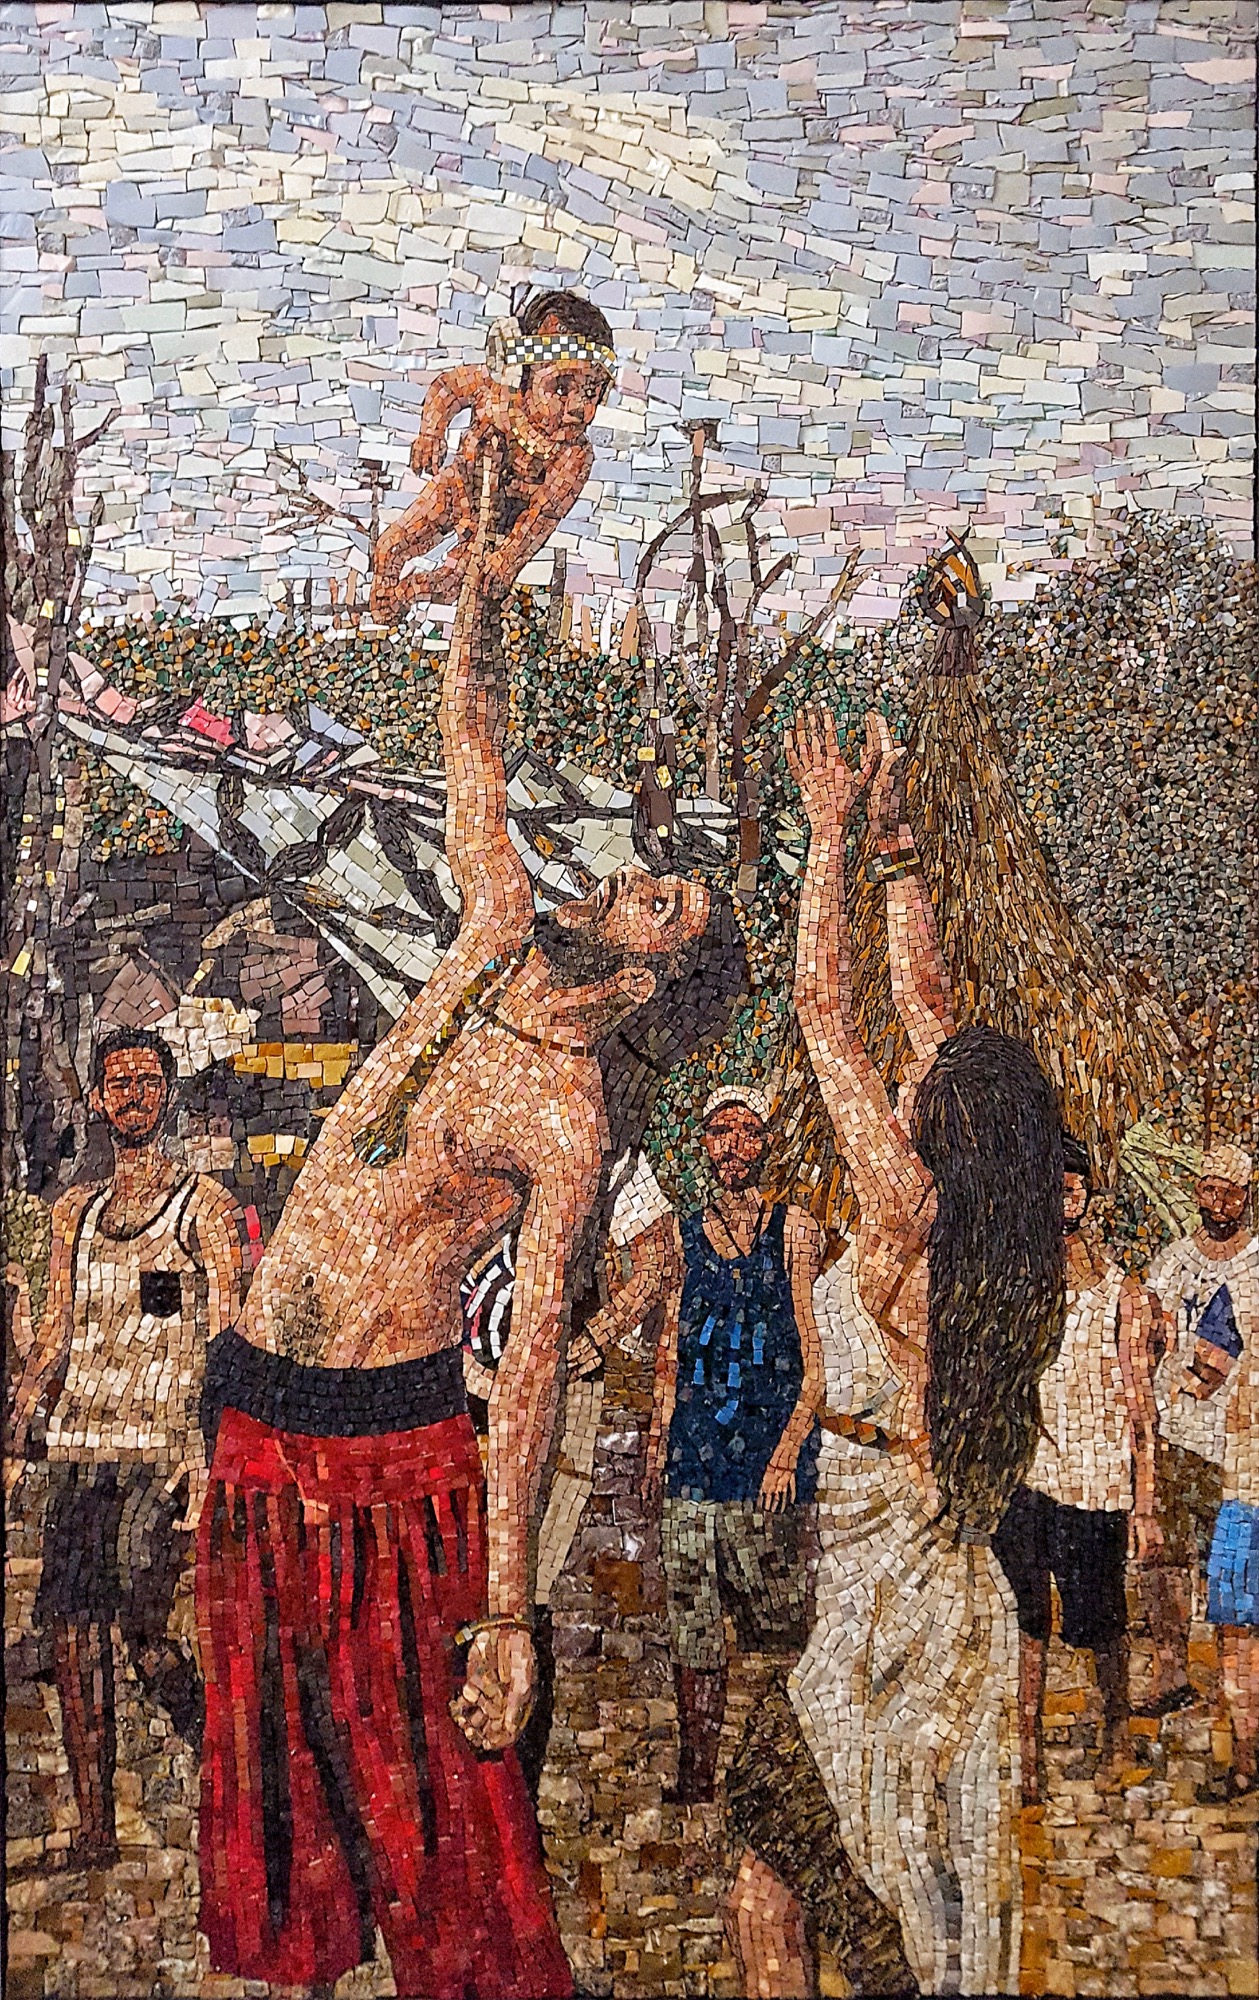 Pierre Fouche. Cain, soon after the fall. 2019. Mosaic.